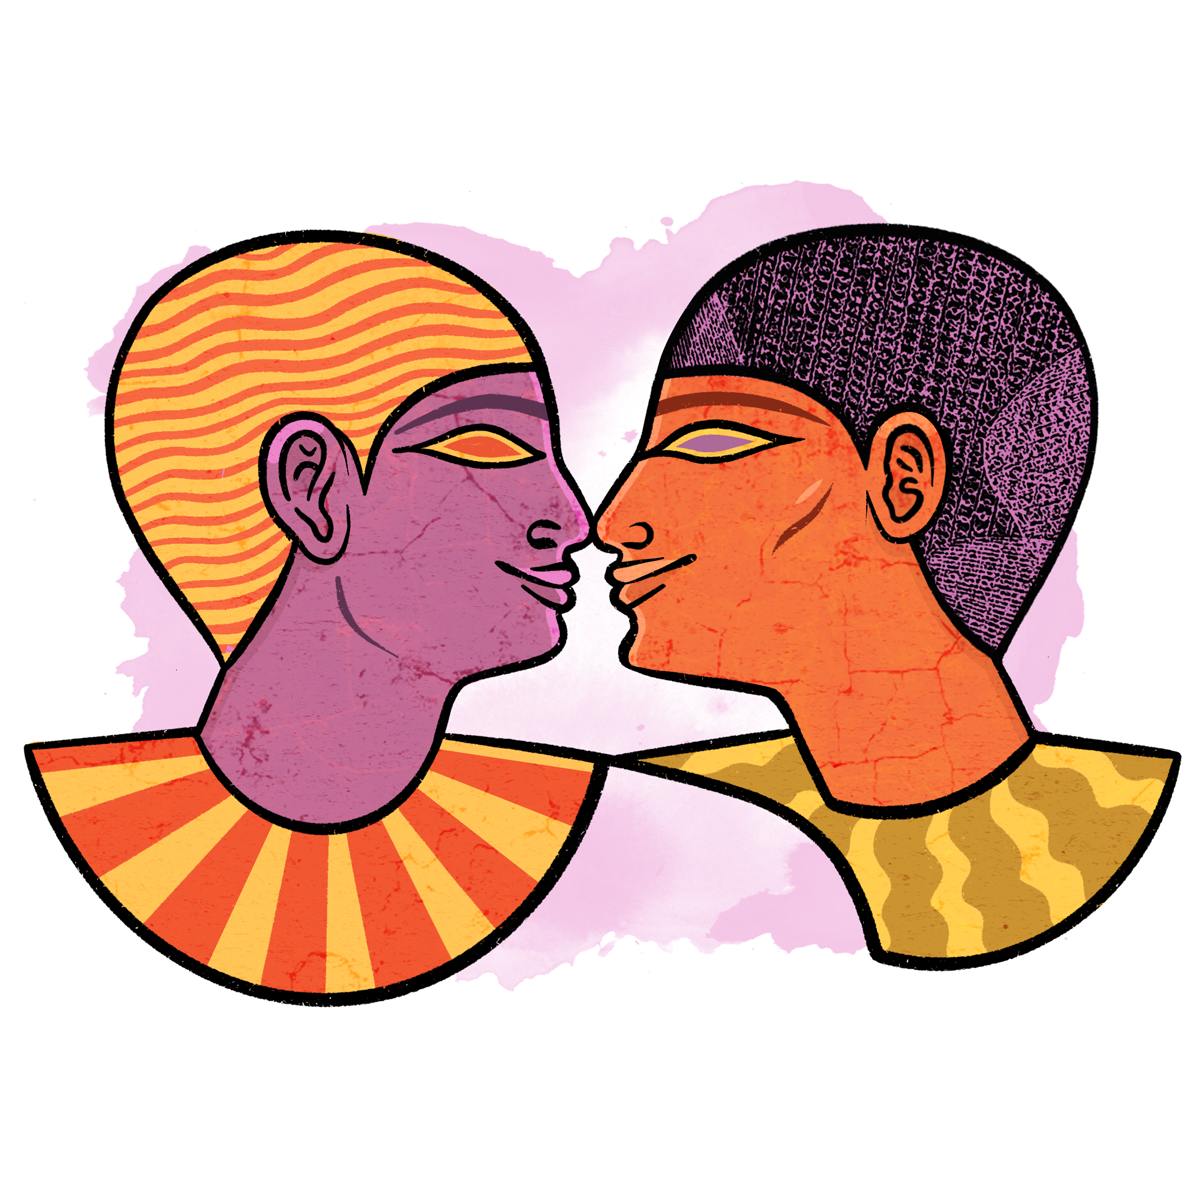 Stylized illustration of Ancient Egyptian men touching noses